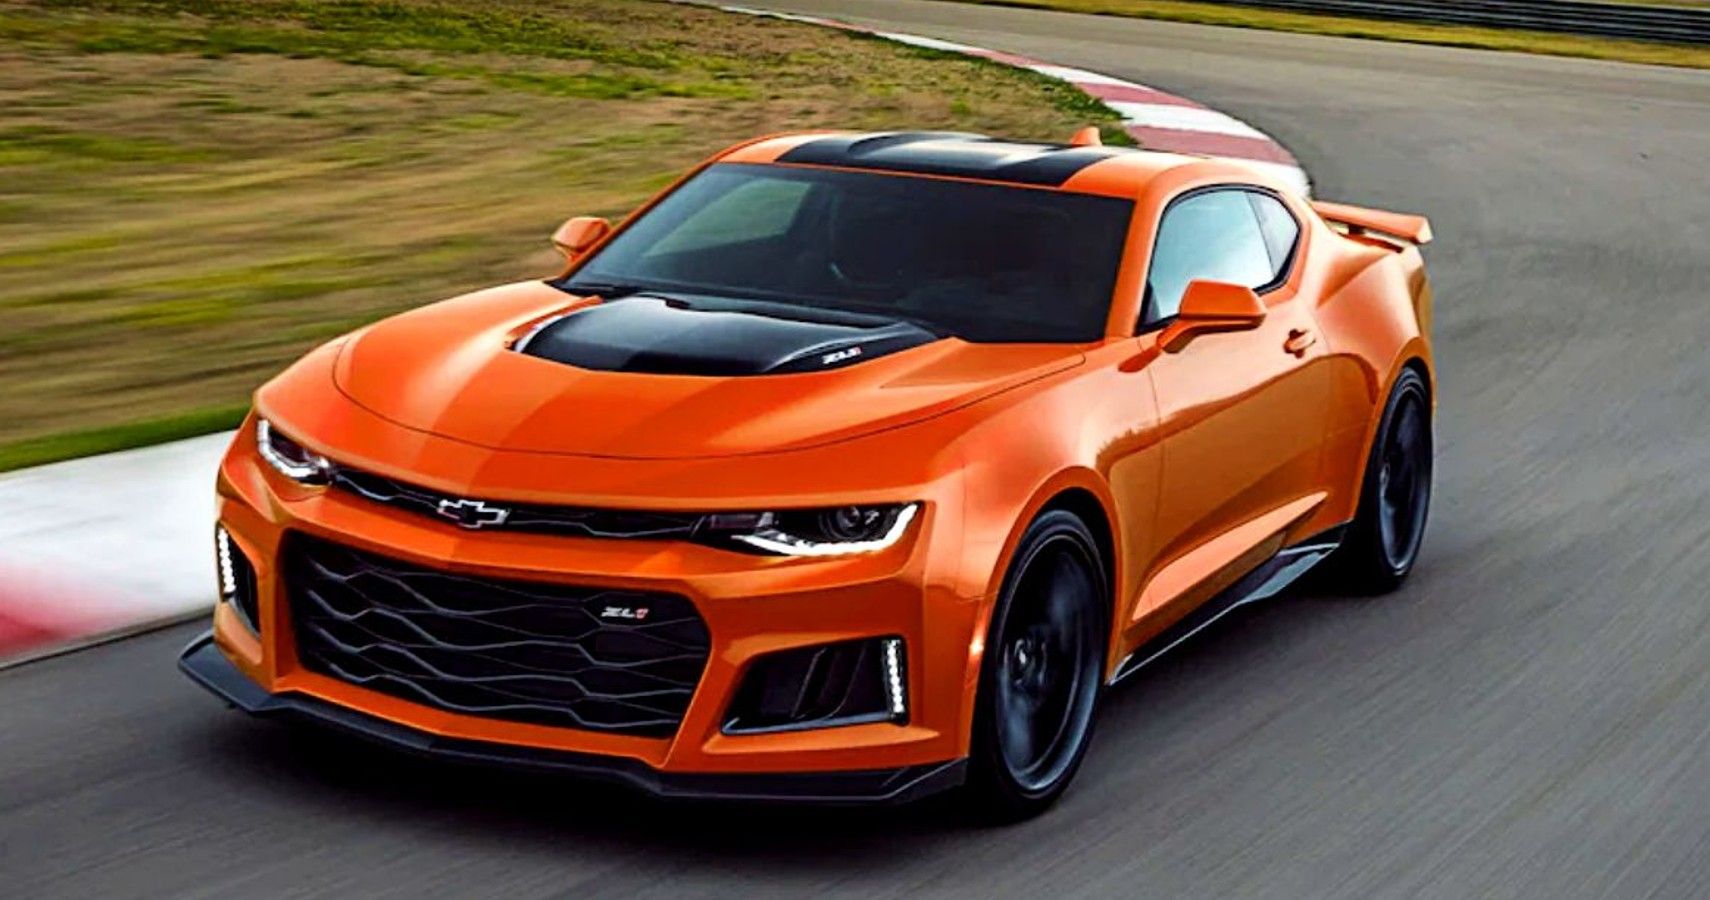 Chevy Camaro production is ending, but a successor may be in the